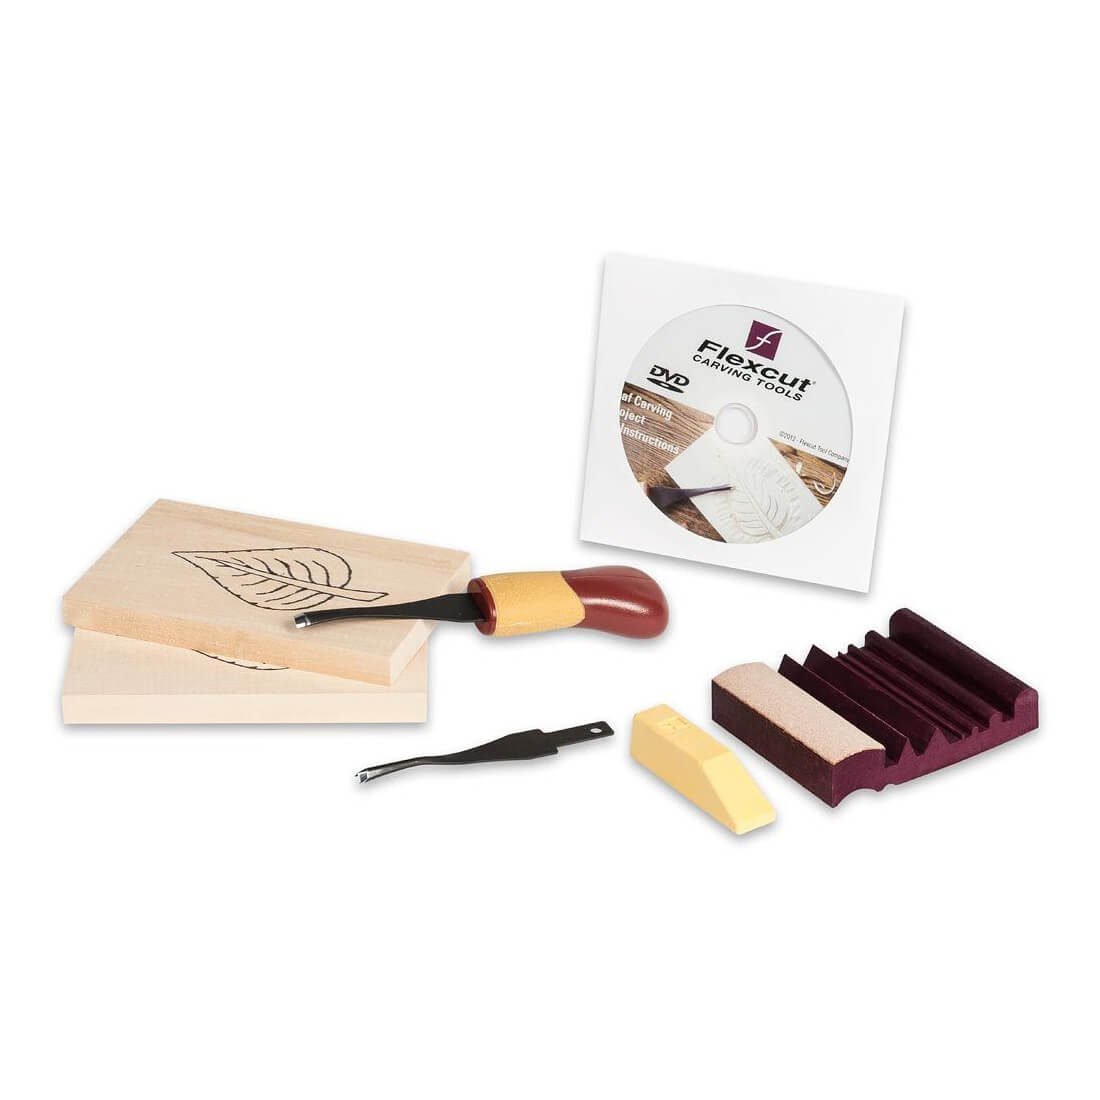 Flexcut Beginner 2-Blade Craft Carver Set Package comprises of a slipstrop, two blades with handle, wax block and two pieces of basswood. Supplied with instructional DVD.